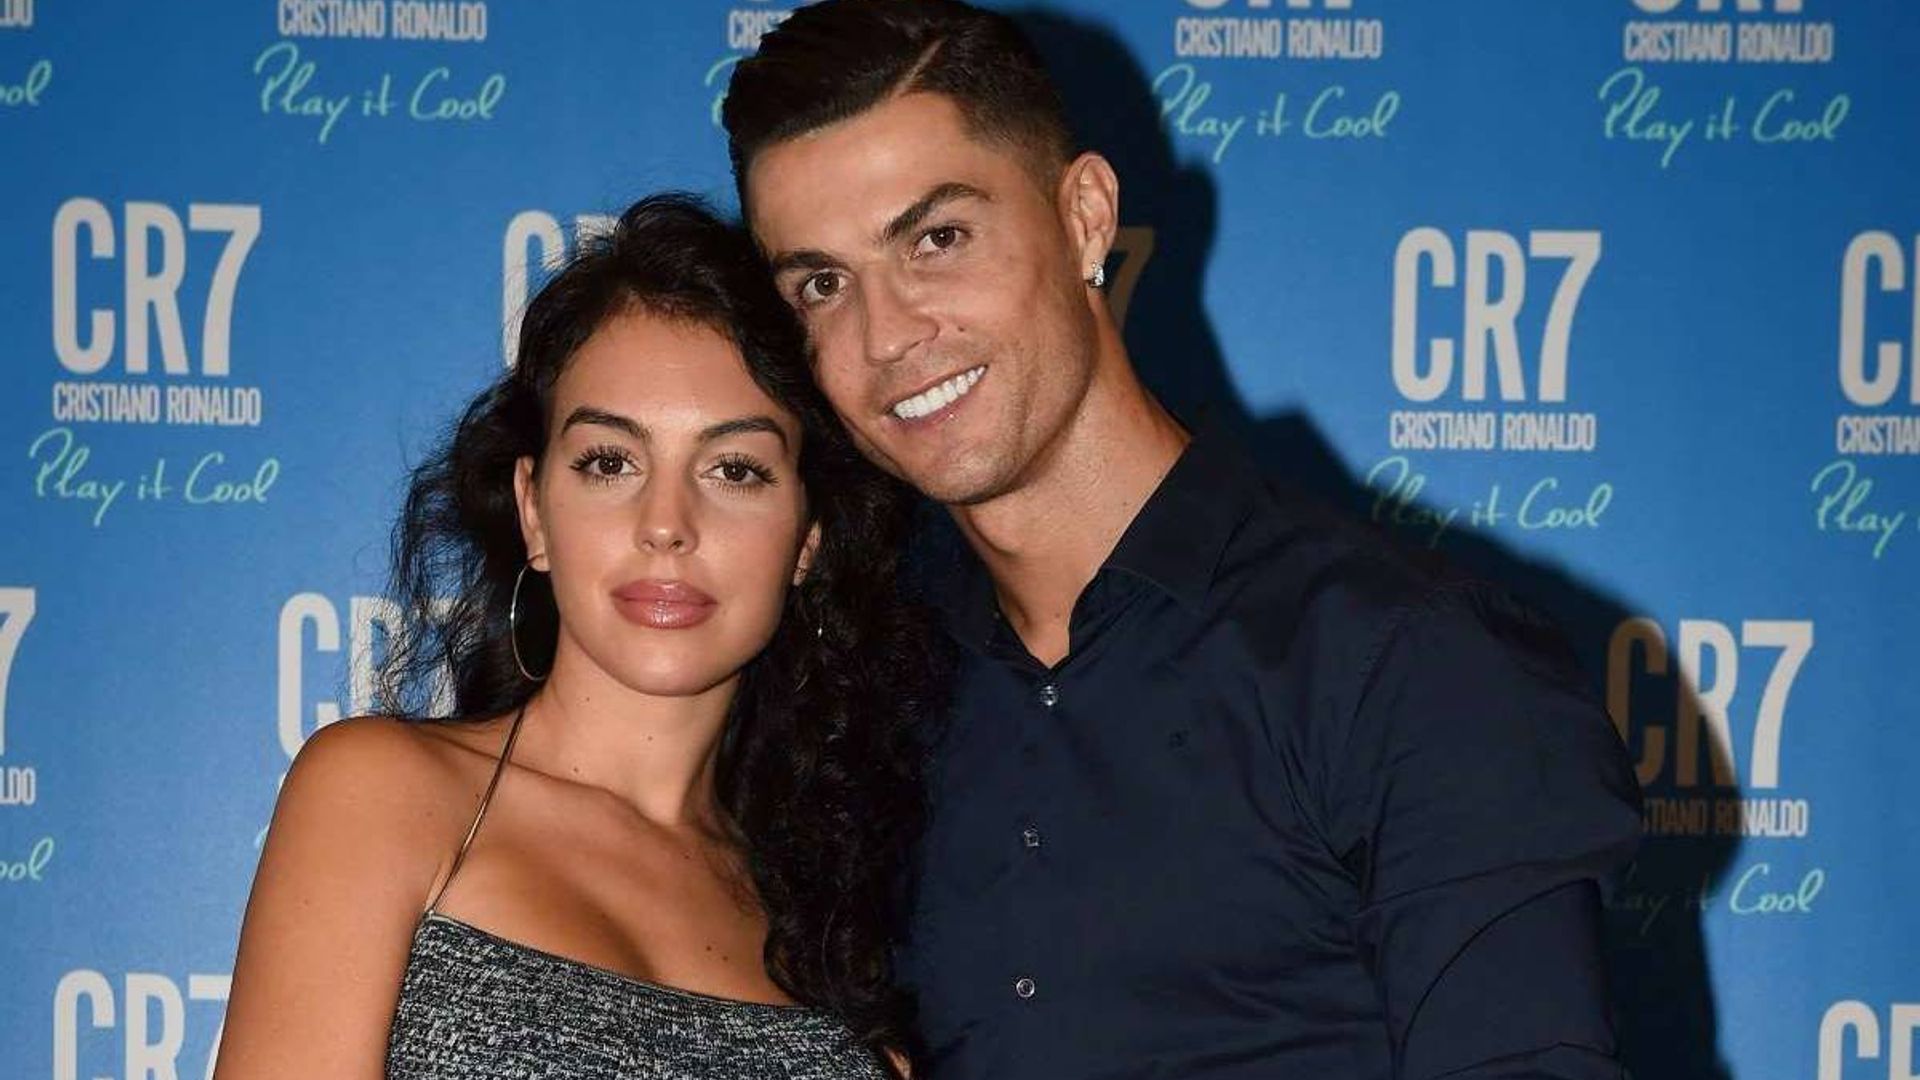 Cristiano Ronaldo and Georgina Rodriguez reveal gender of new twins with adorable family video